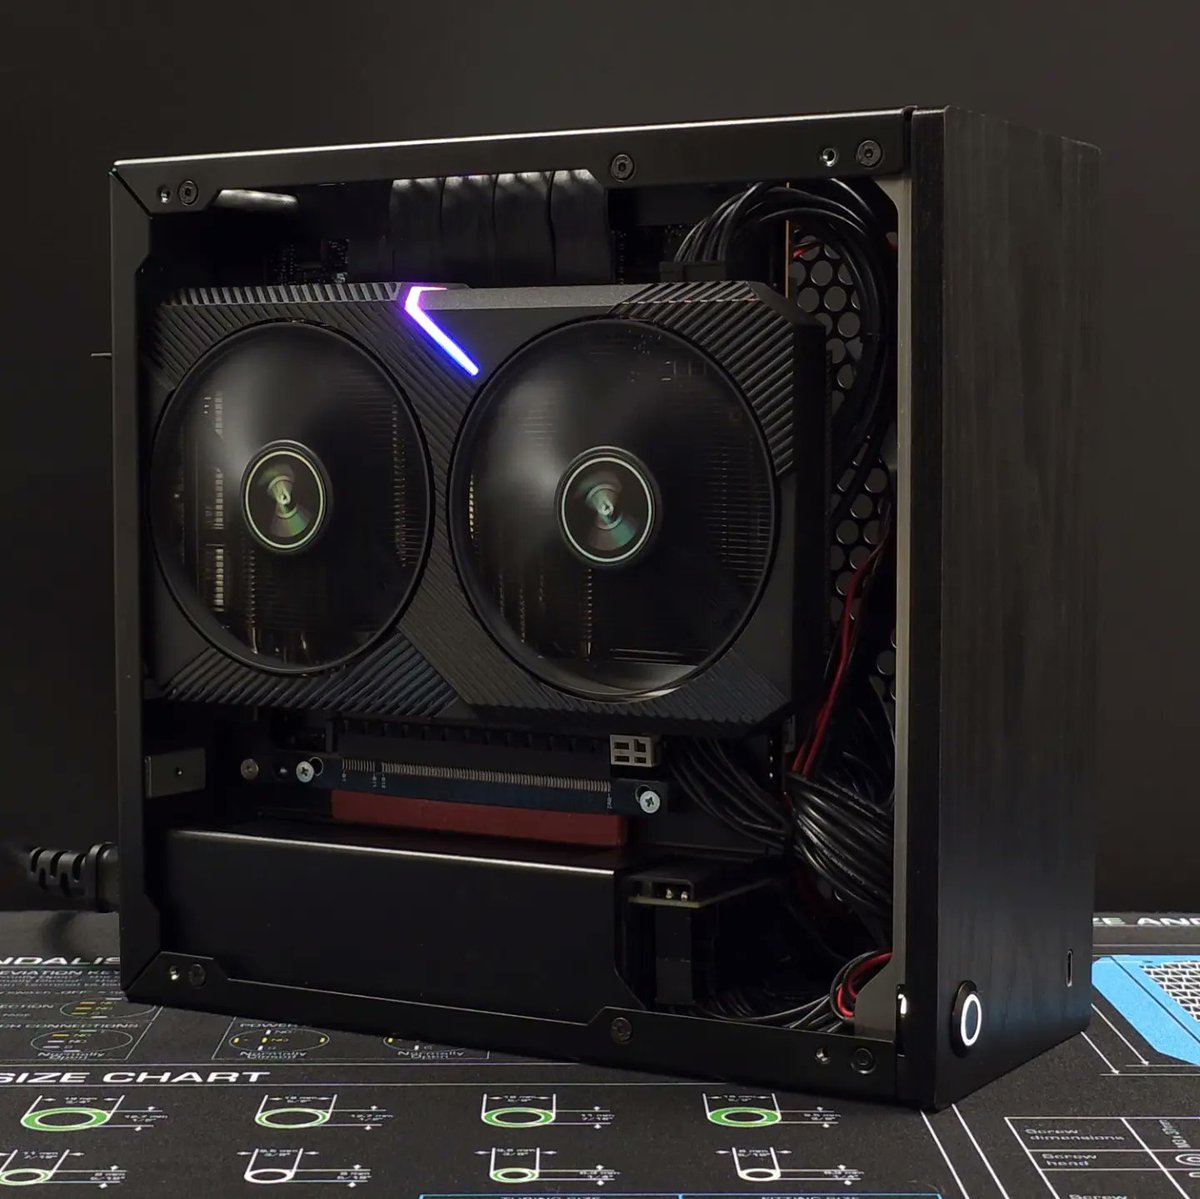 GEEEKCASE's modular ENP-7660B, with its silicone cables, is a game changer for ultra small form factor builds. It made cable management in this 5.5L PC, an absolute breeze 👌

geeekstore.com/shop/enhance-e…

#sffpc #itx #pc #gaming #pcbuild